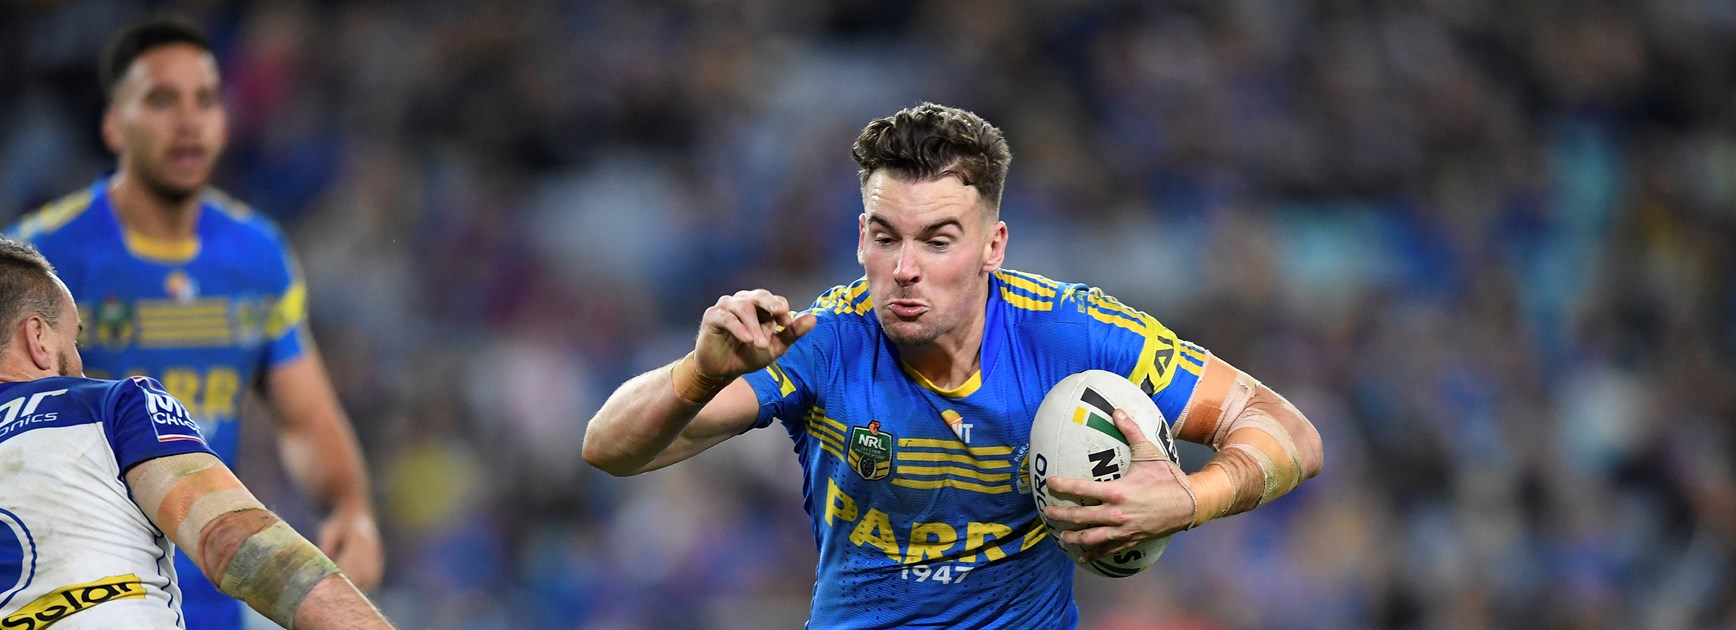 Parramatta Eels: 2017 season by the numbers